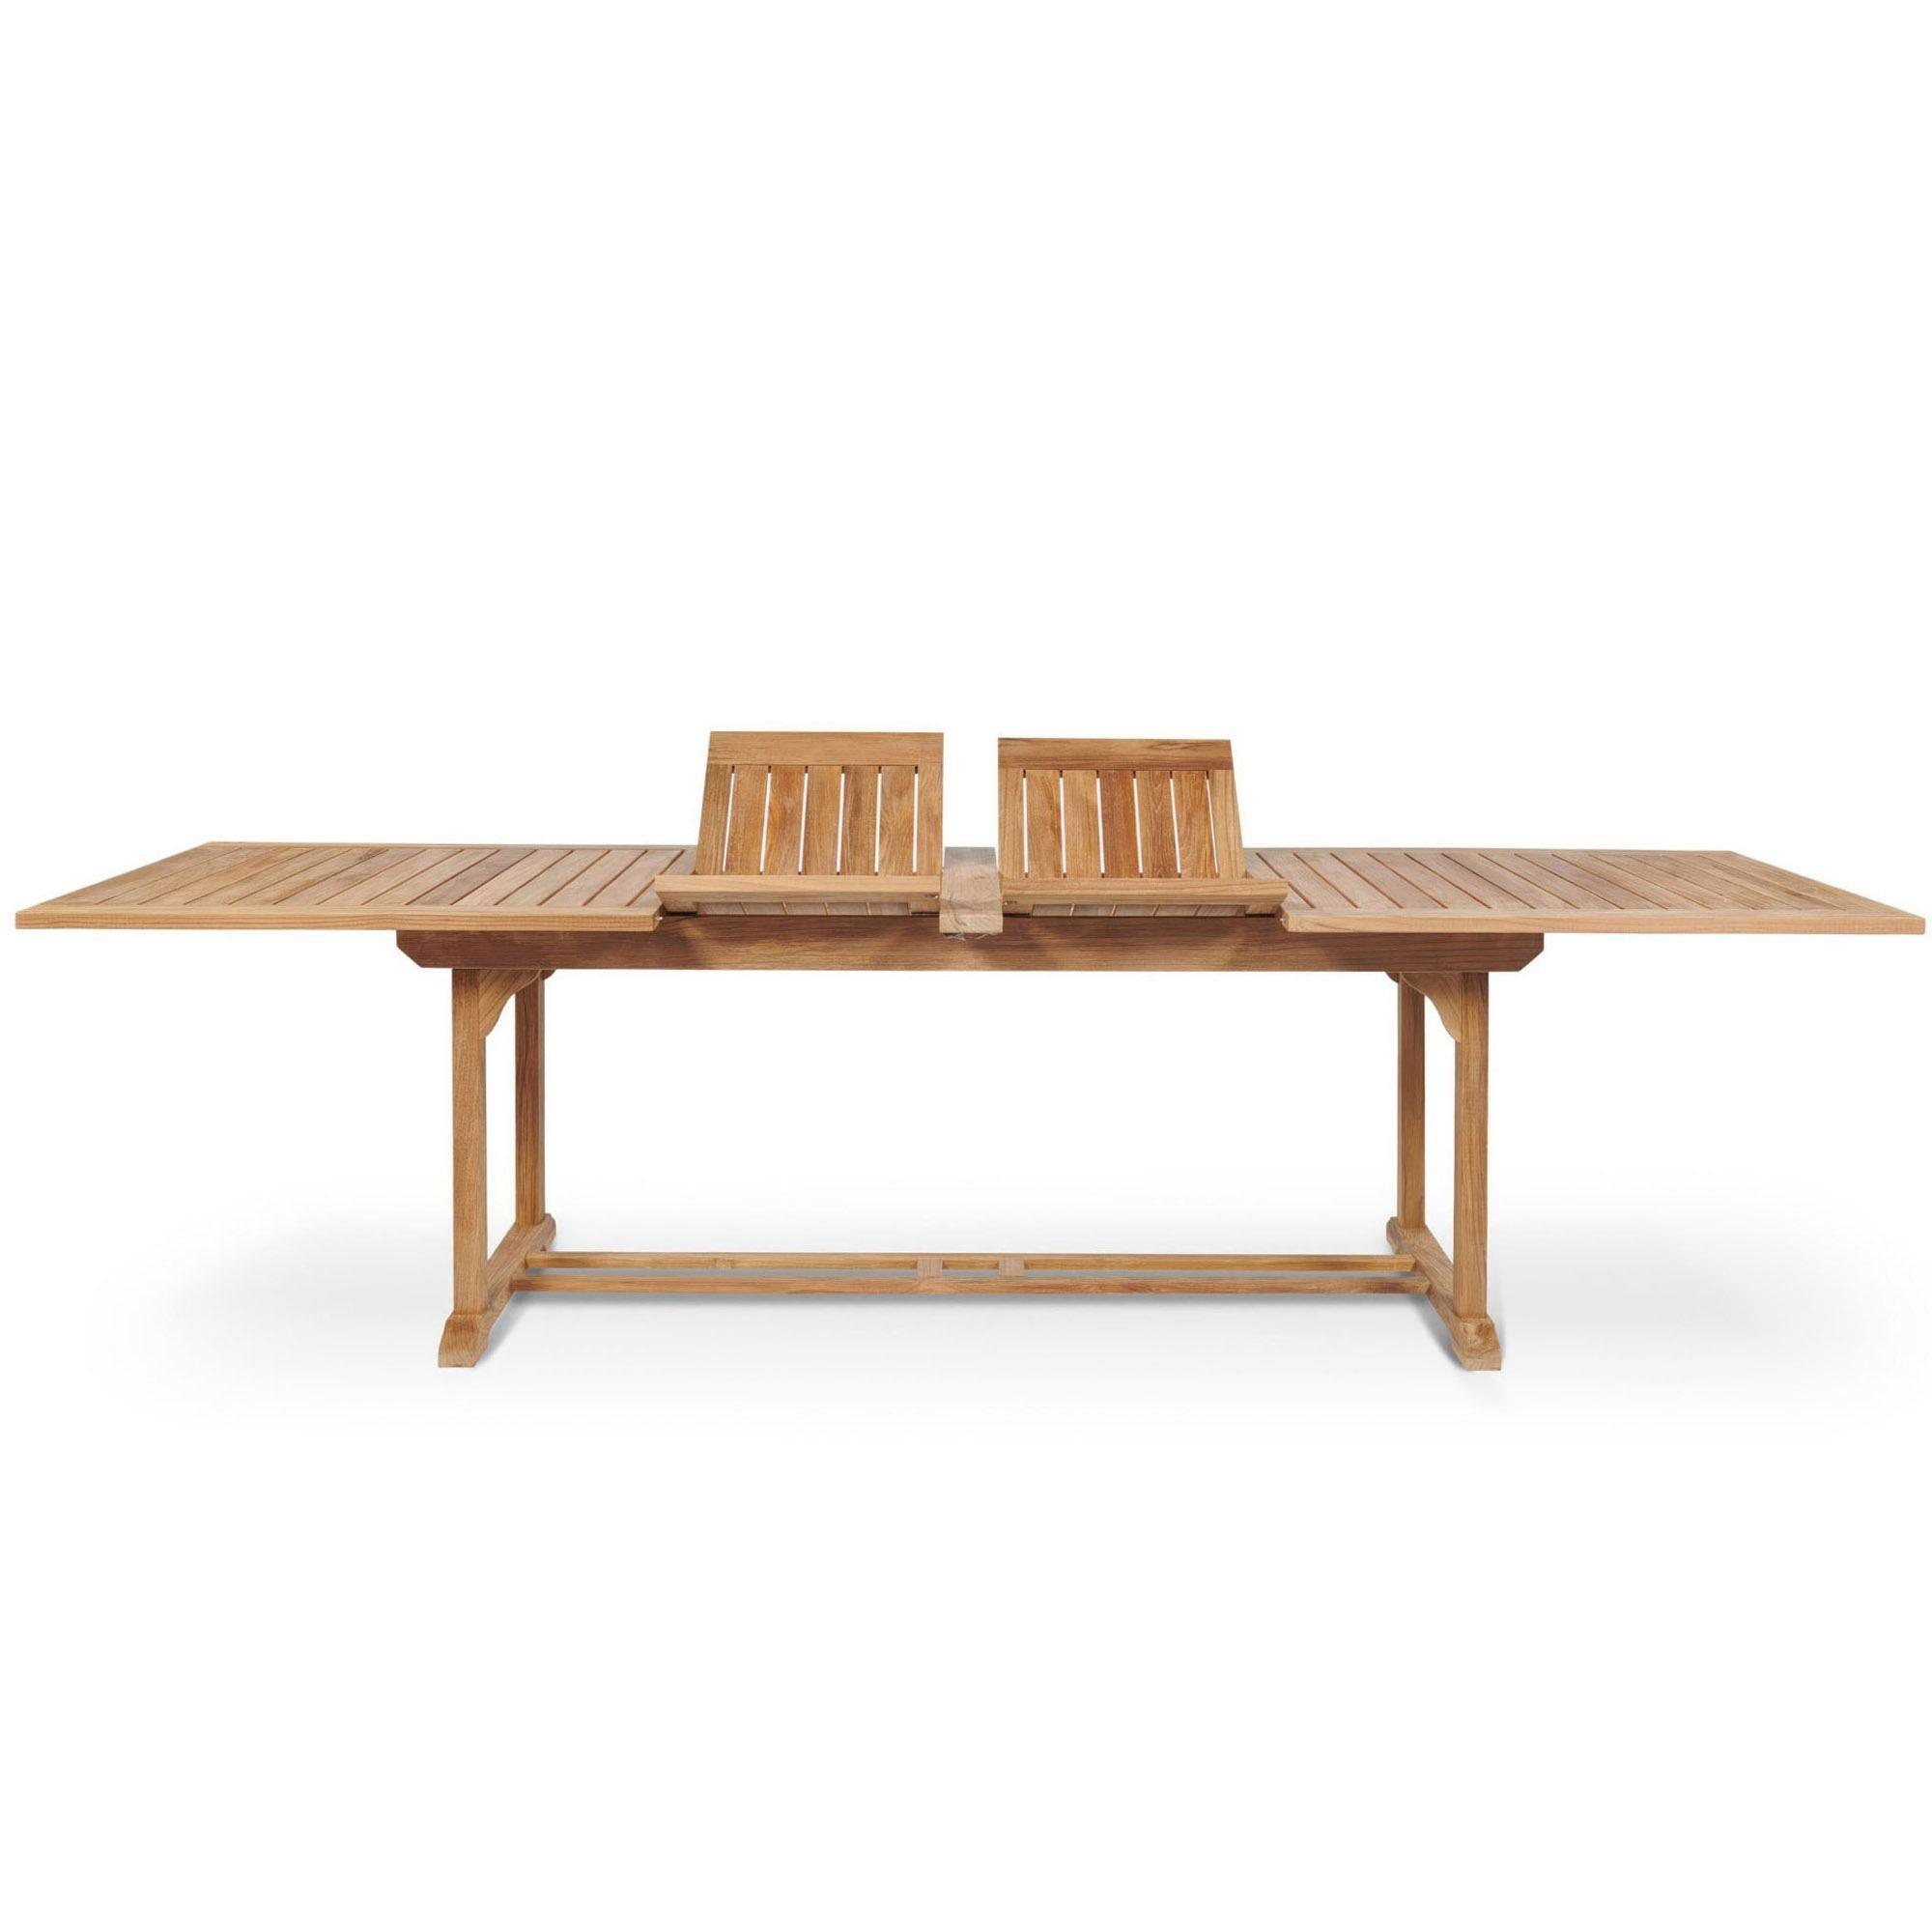 LOOMLAN Outdoor - Ihland Rectangular Teak Outdoor Dining Table with Double Extensions and Umbrella Hole - Outdoor Dining Tables